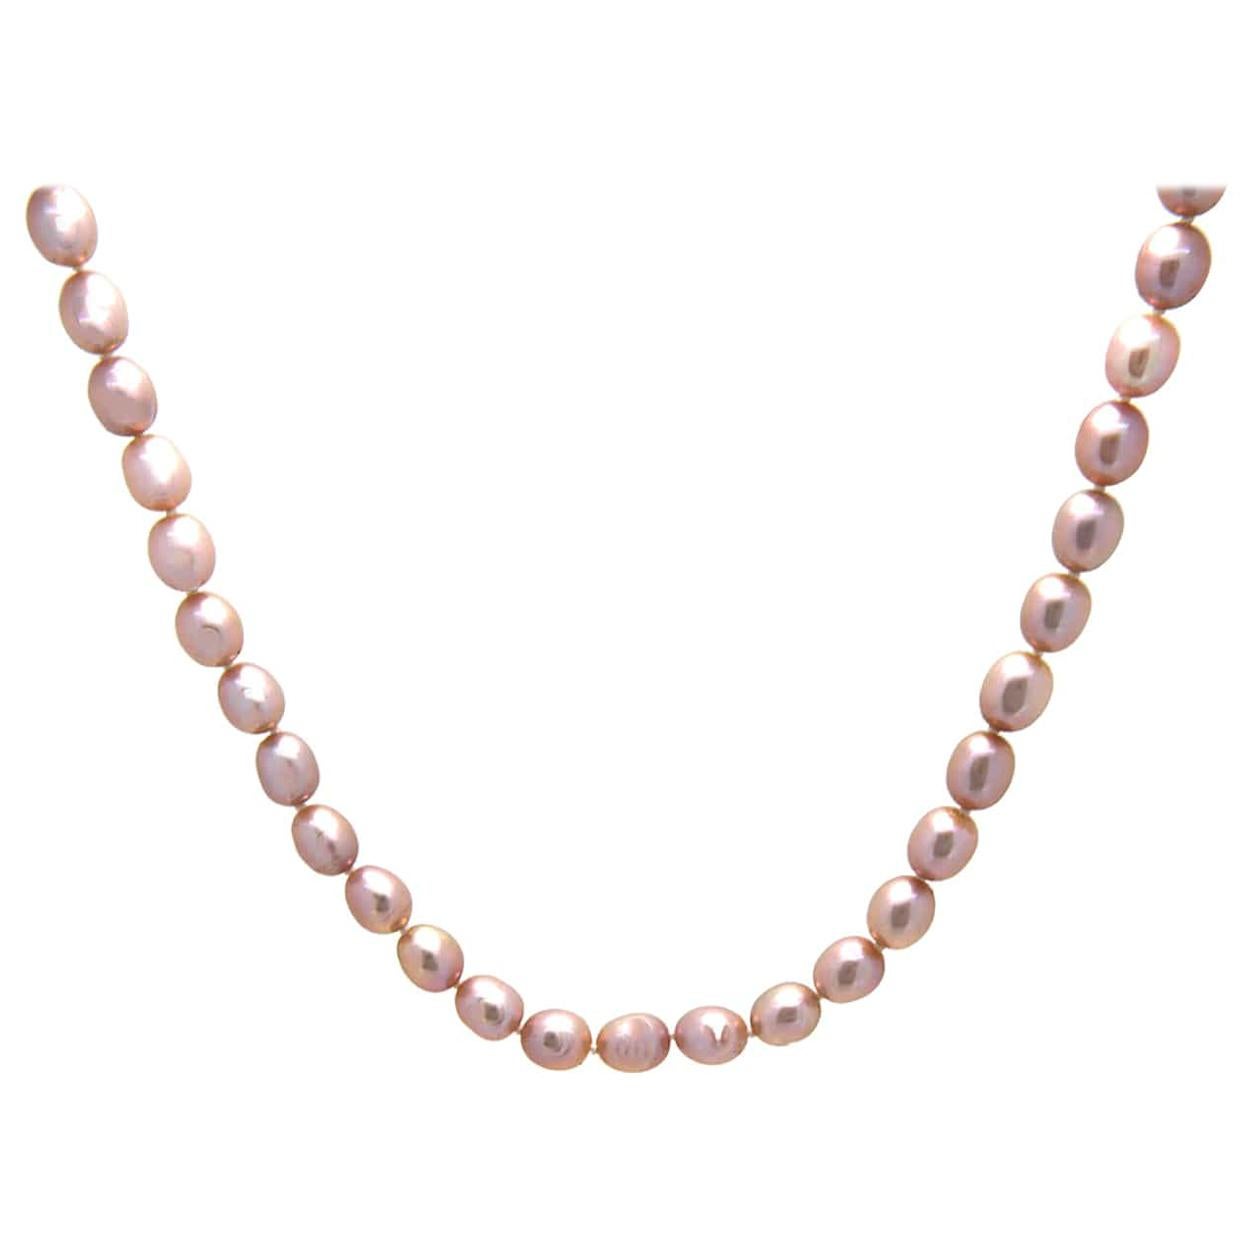 Iridesse Oval Pink Cultured Pearls with Folder and Box